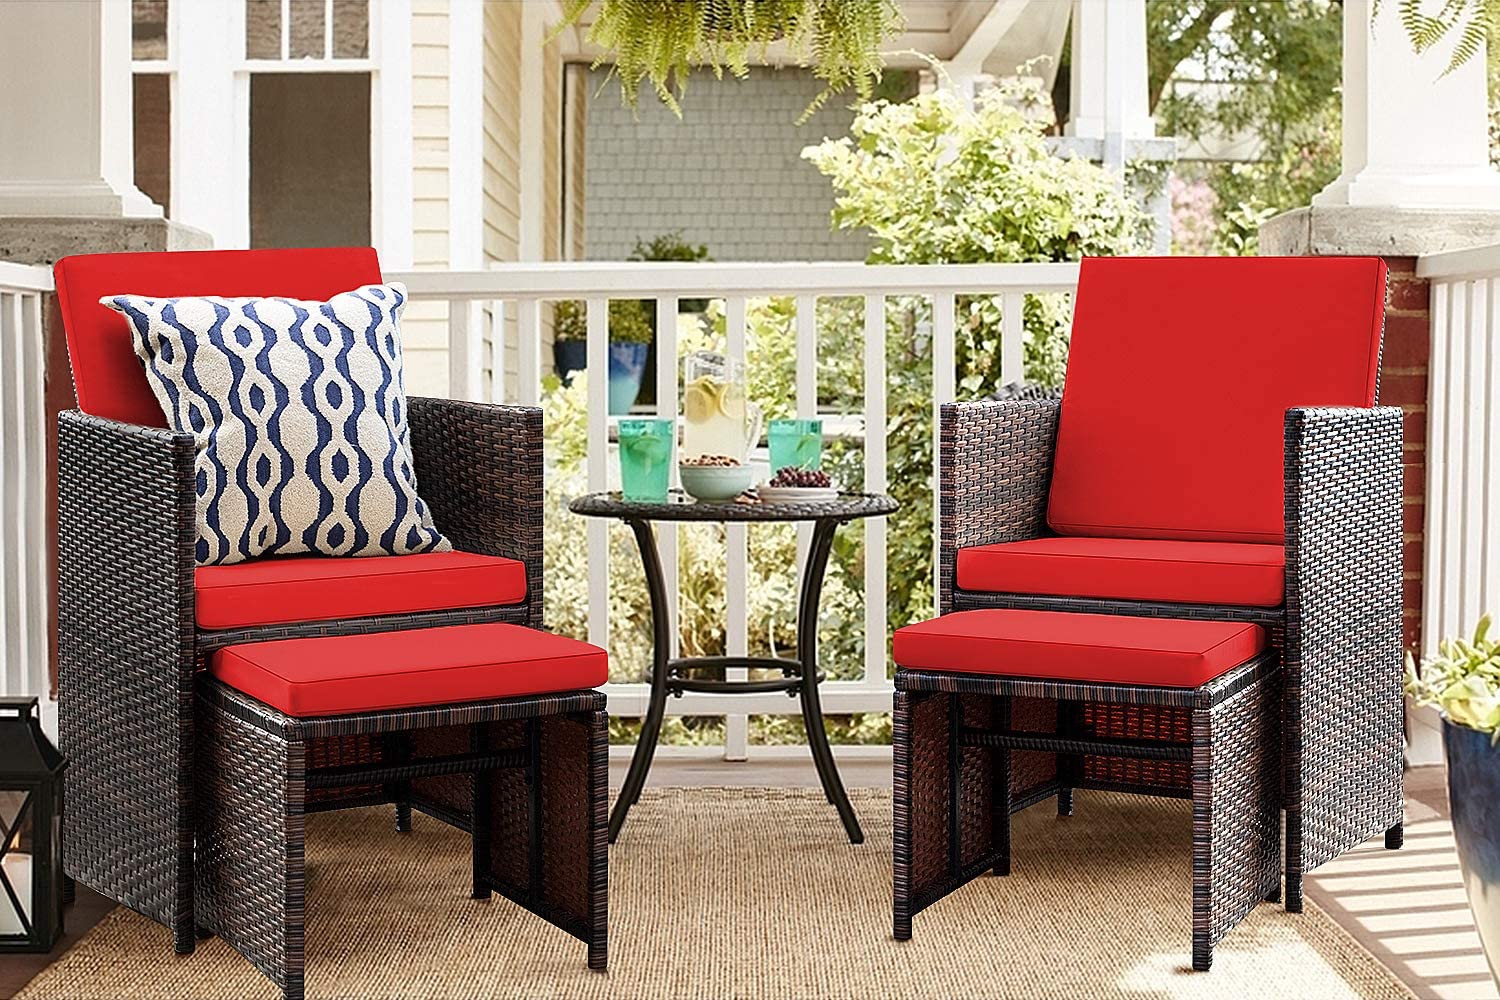 Lacoo 4 Pieces Patio Wicker Furniture Conversation Set with Two Ottomans Collapsible Balcony Porch Furniture, Red - image 1 of 3